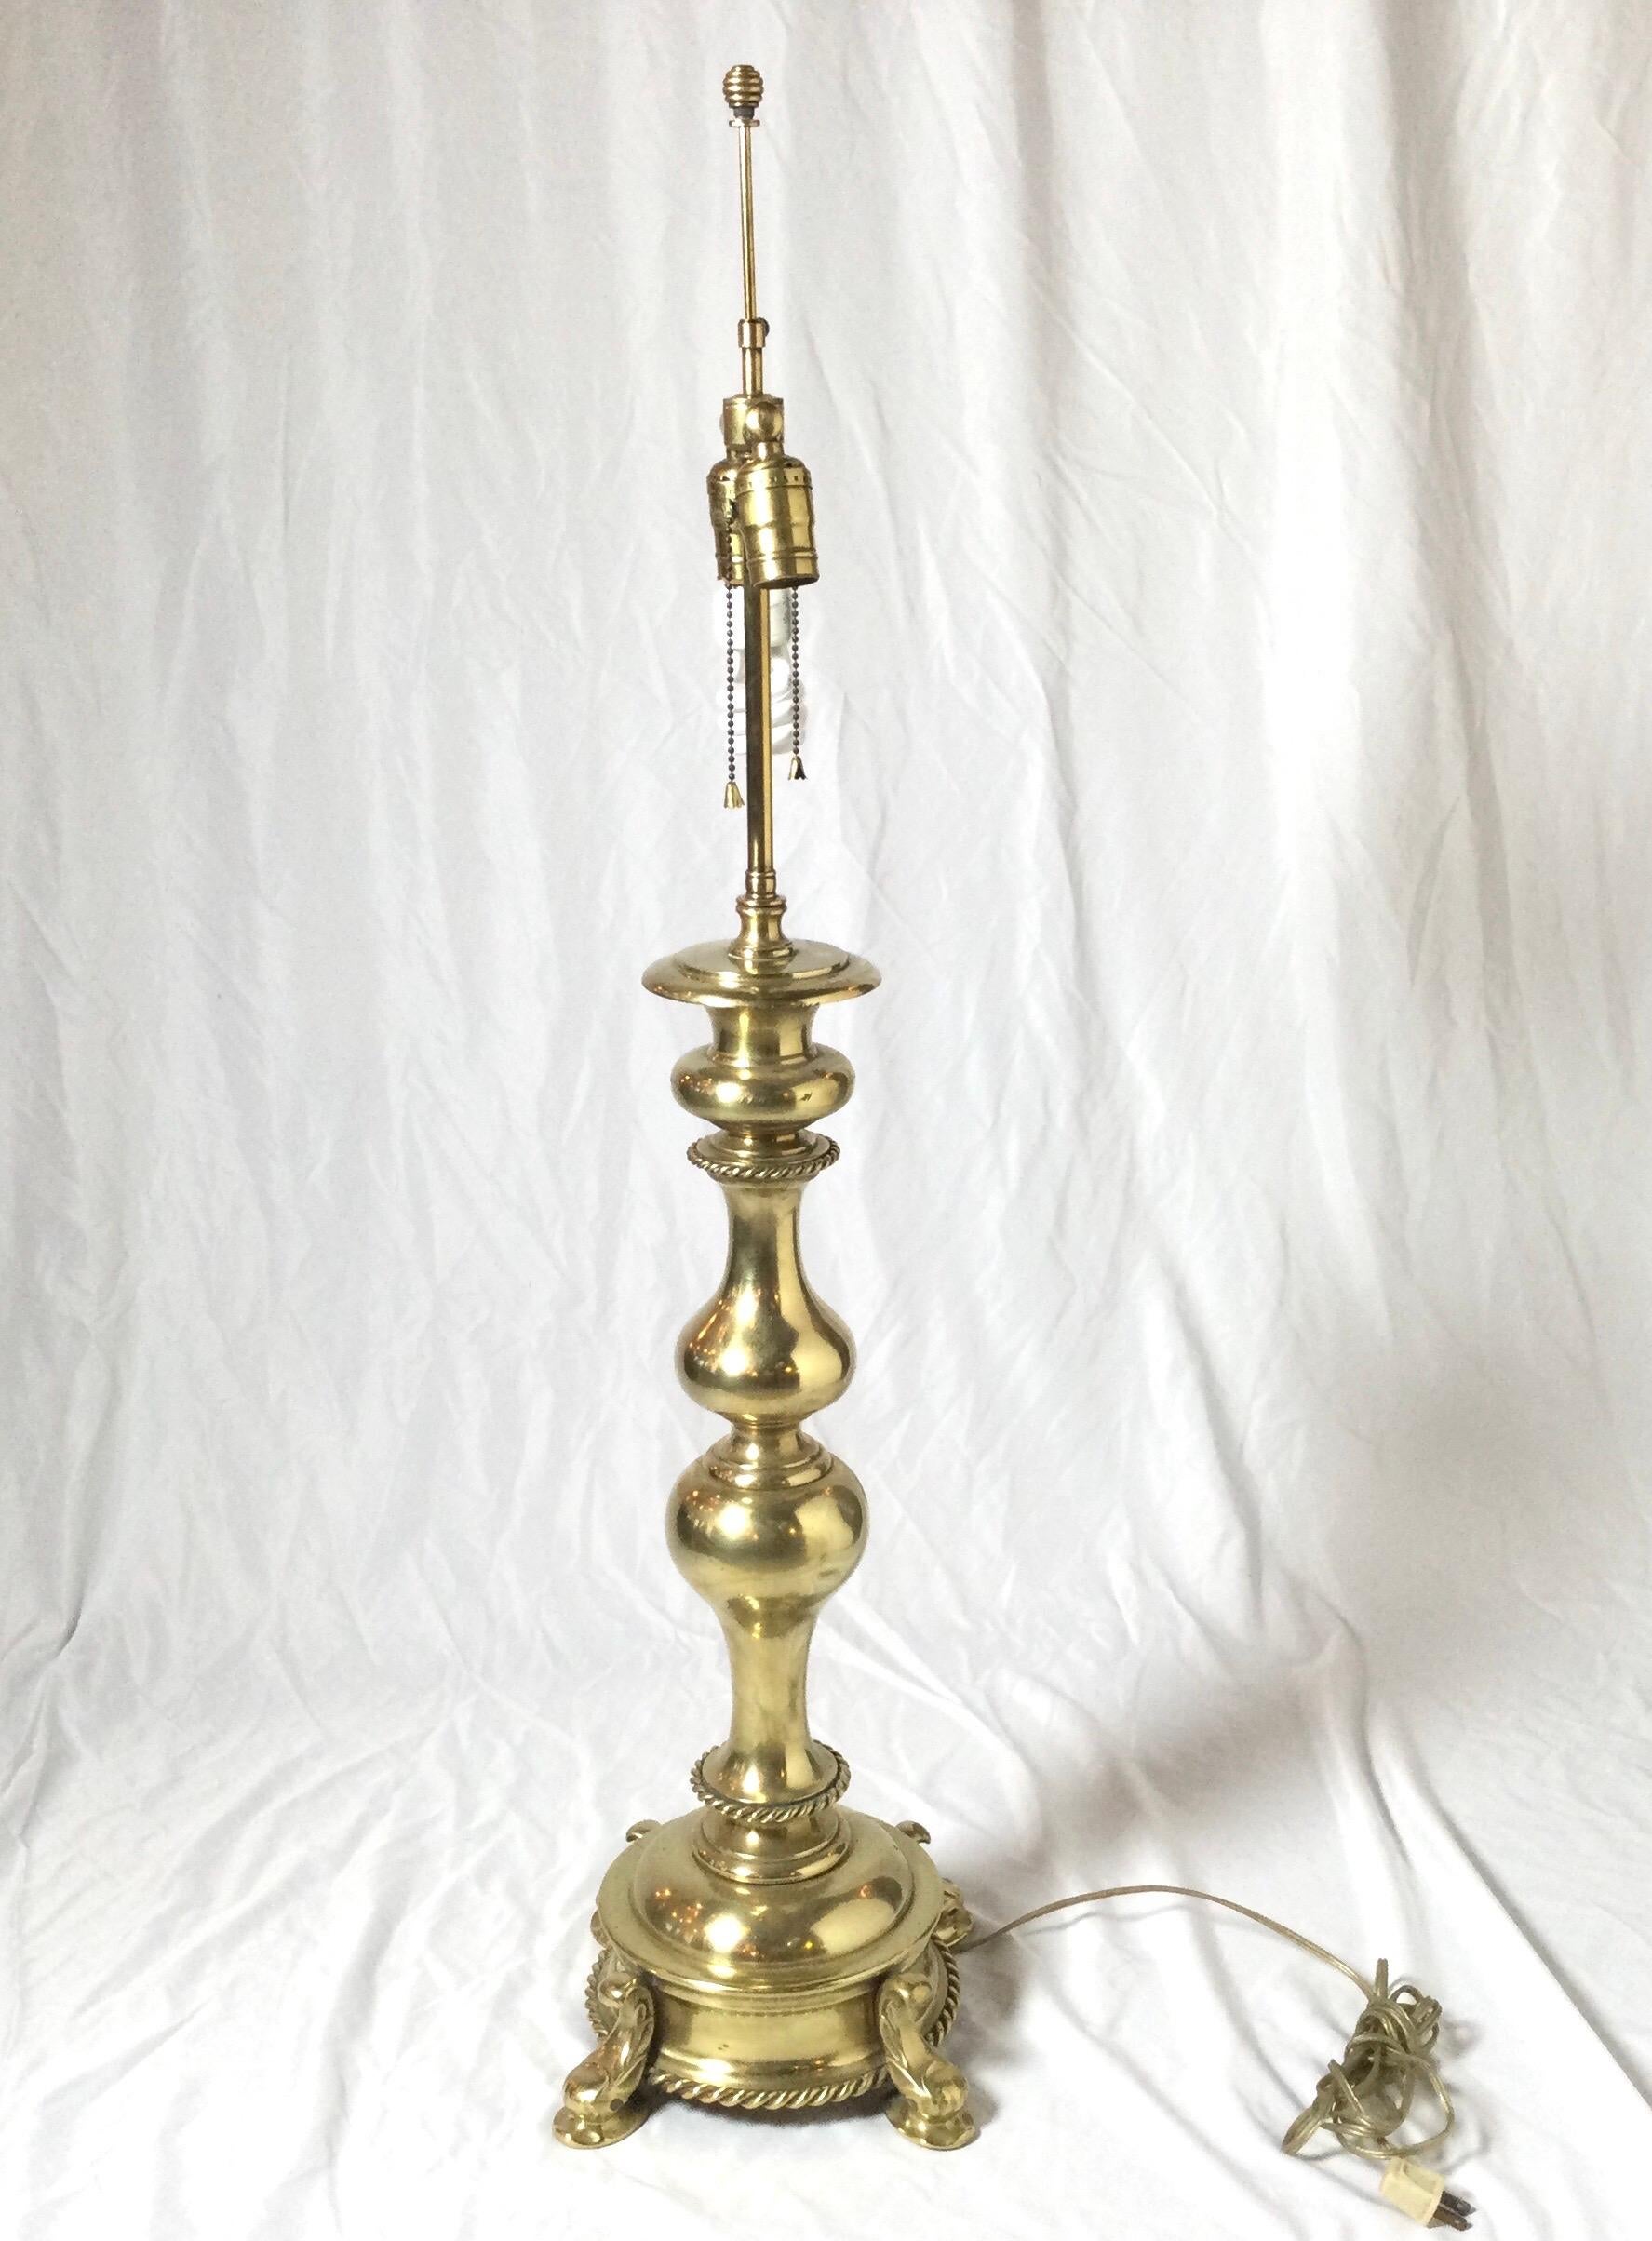 A tall and solid cast brass lamp, attributed to chapman. The shapely center colon on round footed plinth base with rope trim detail. The shade is for photographic purposes and not included. The height as pictured is 40 Inches tall but it is